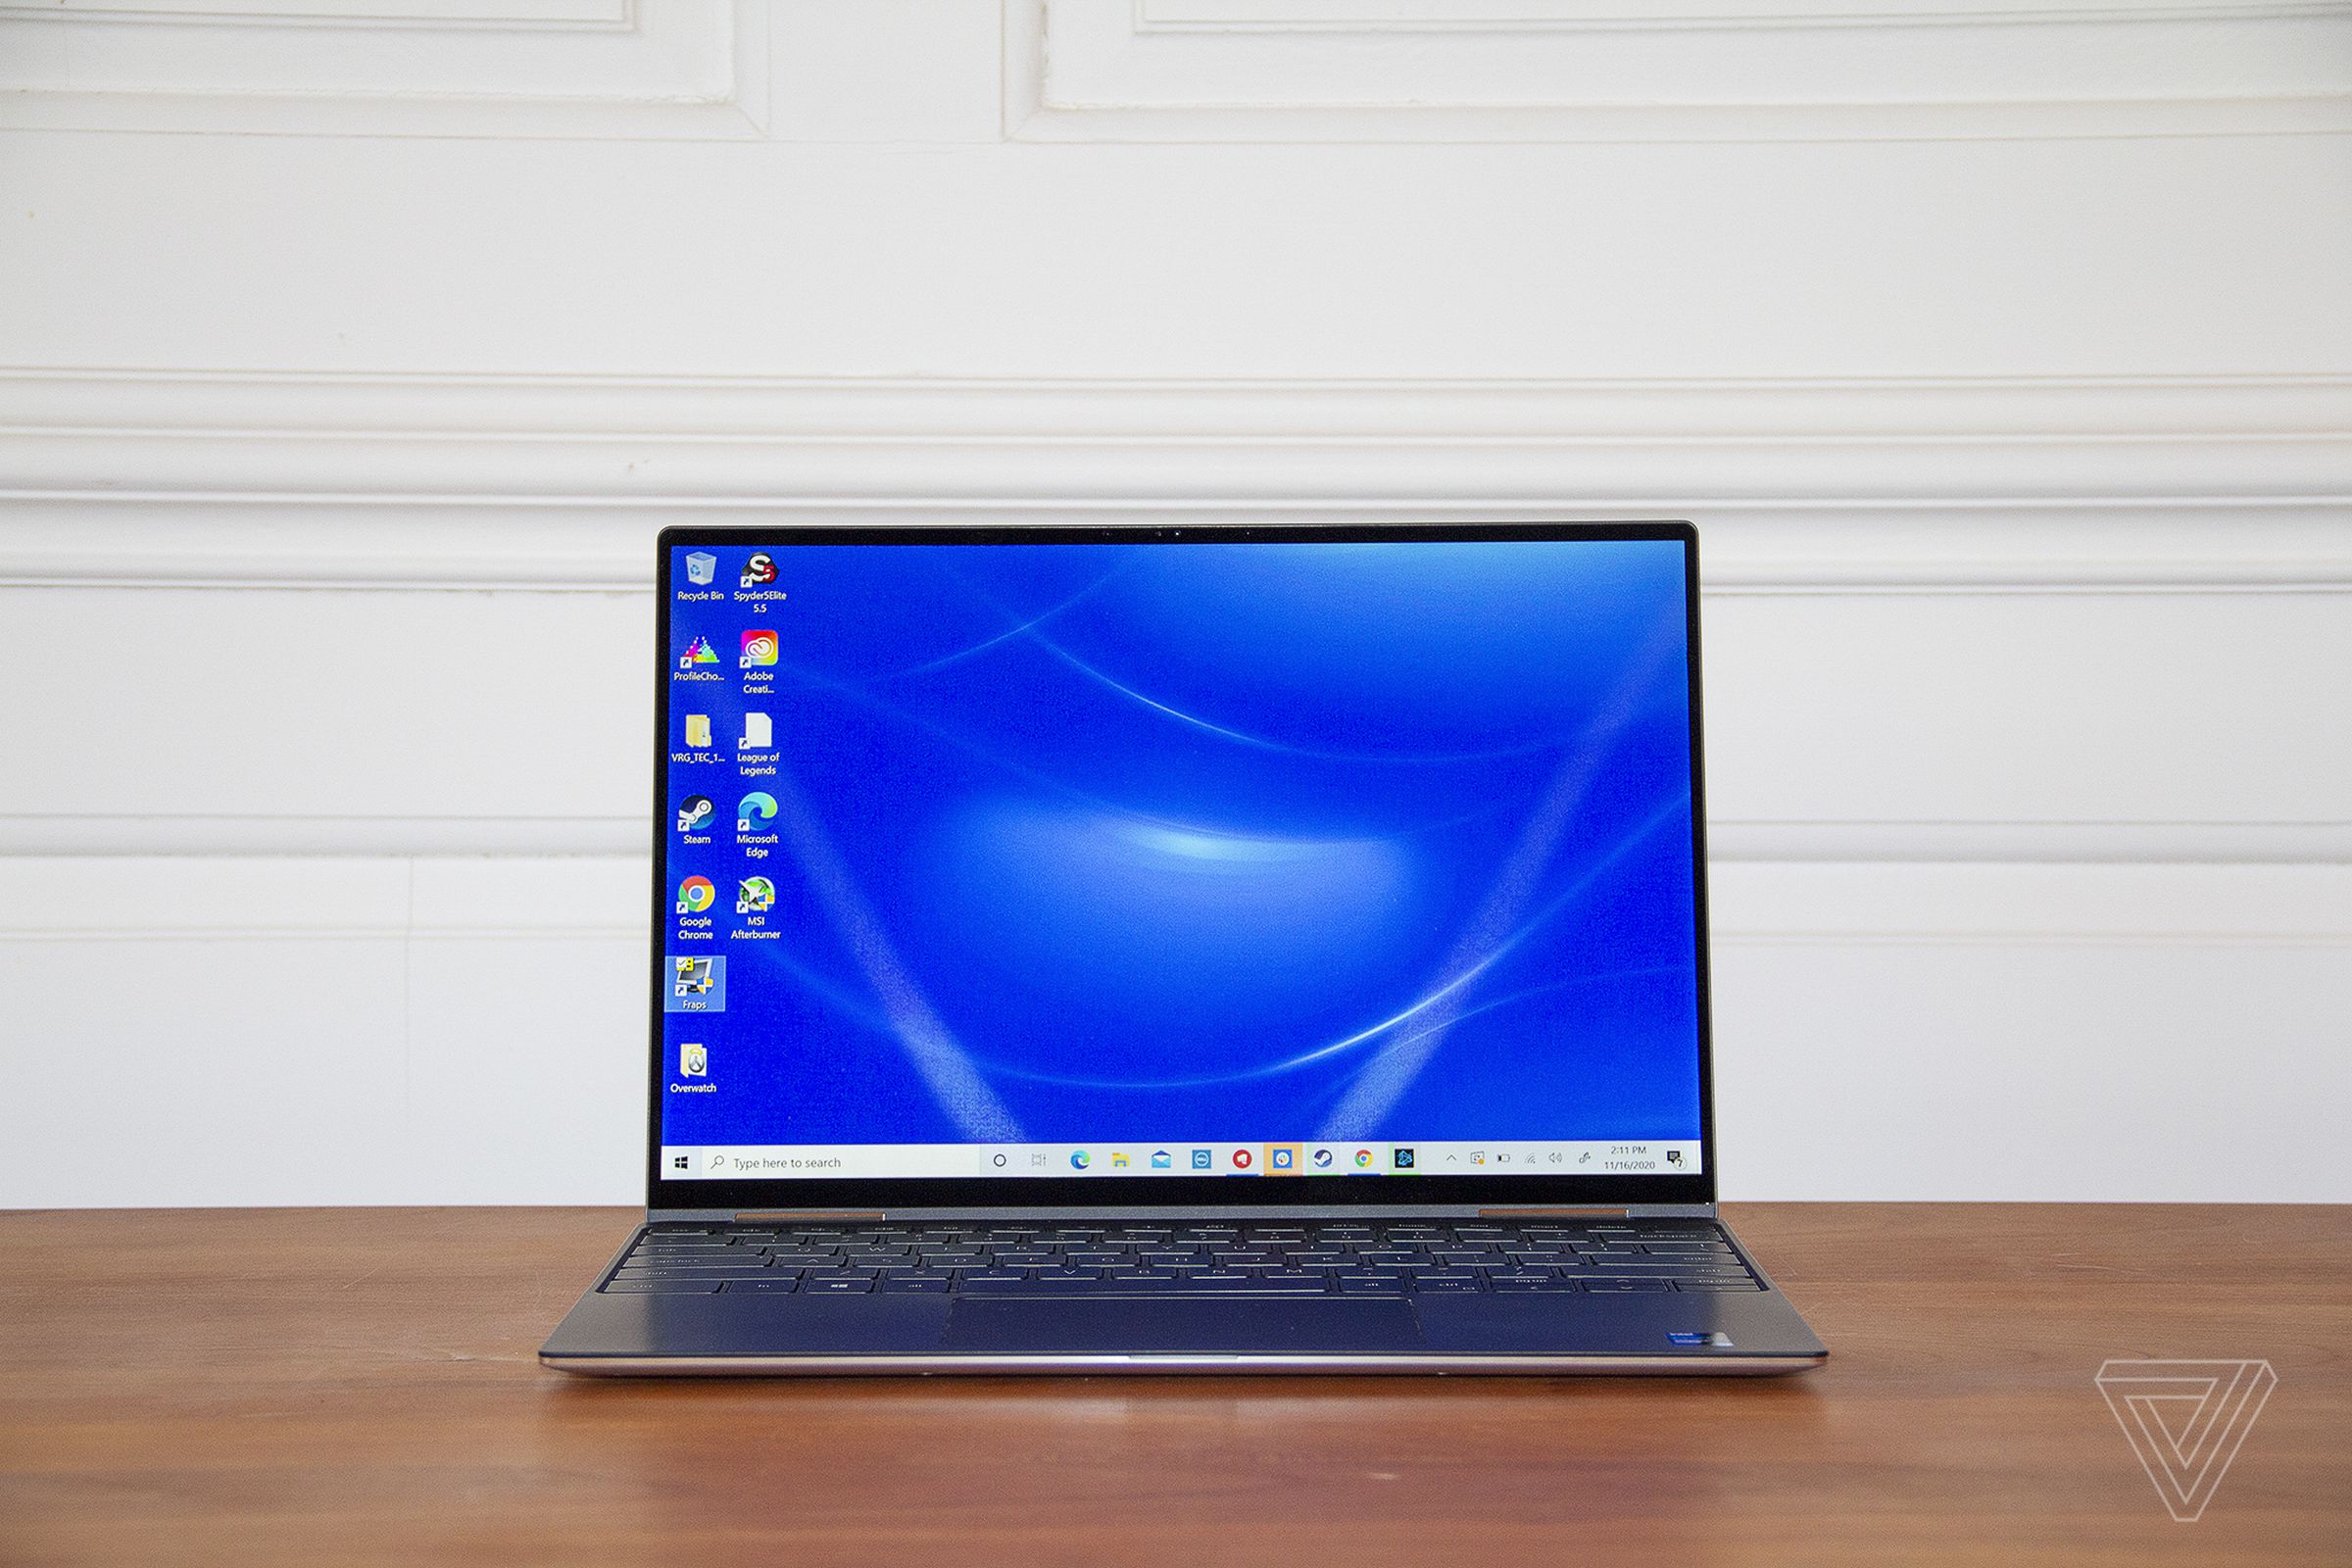 The Dell XPS 13 2-in-1 open, facing forward.